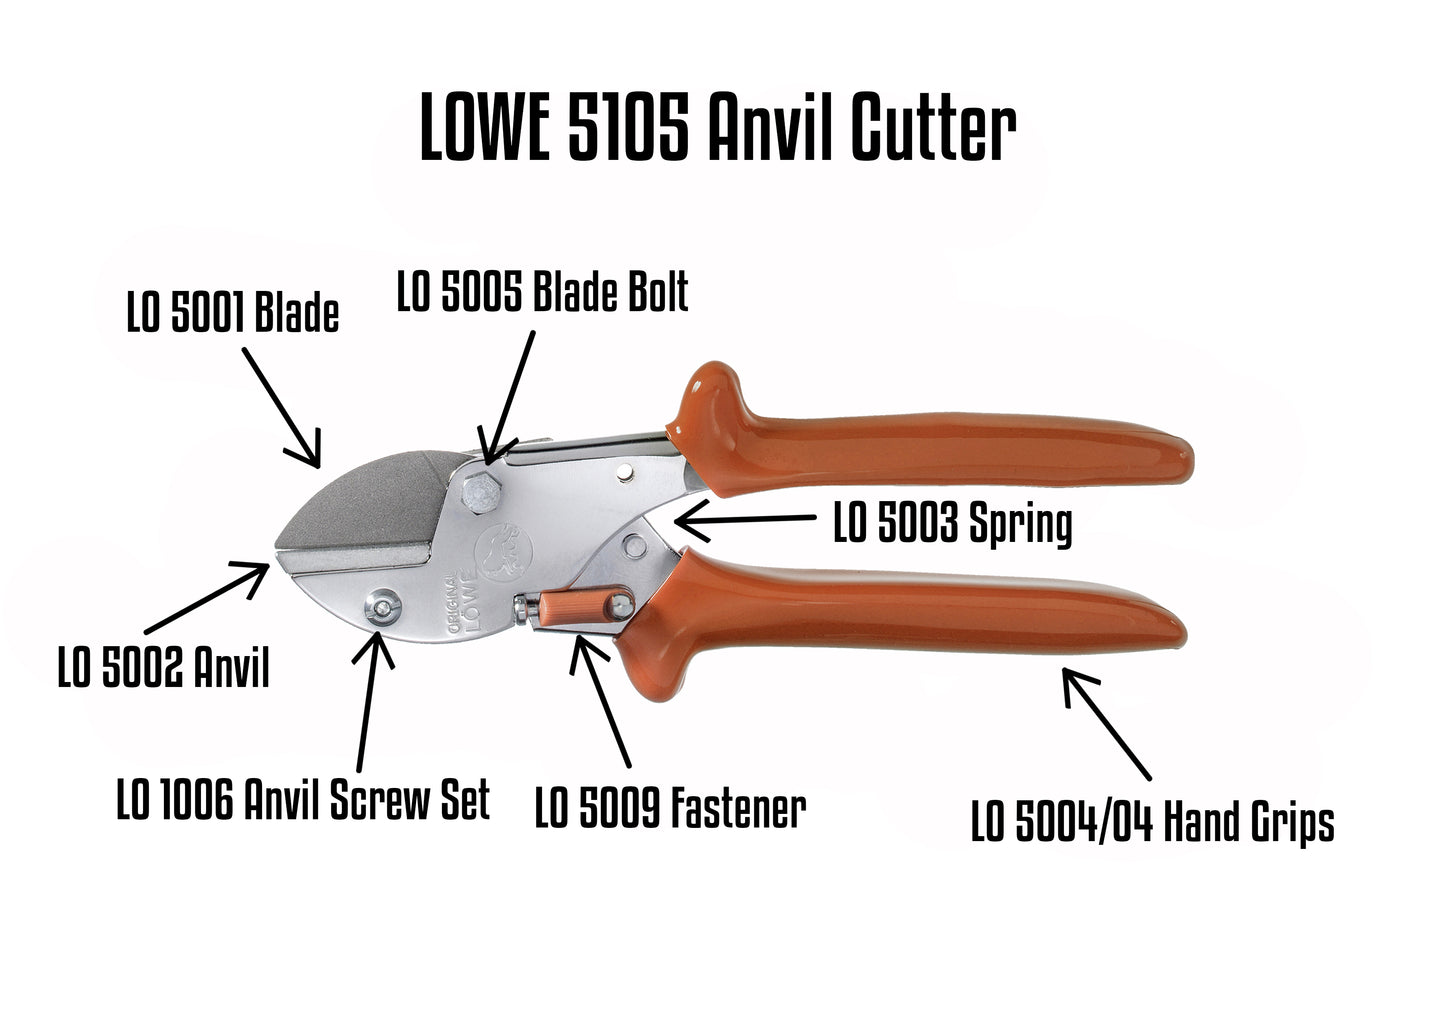 LO5105 - ANVIL CUTTER (25mm length of cut)